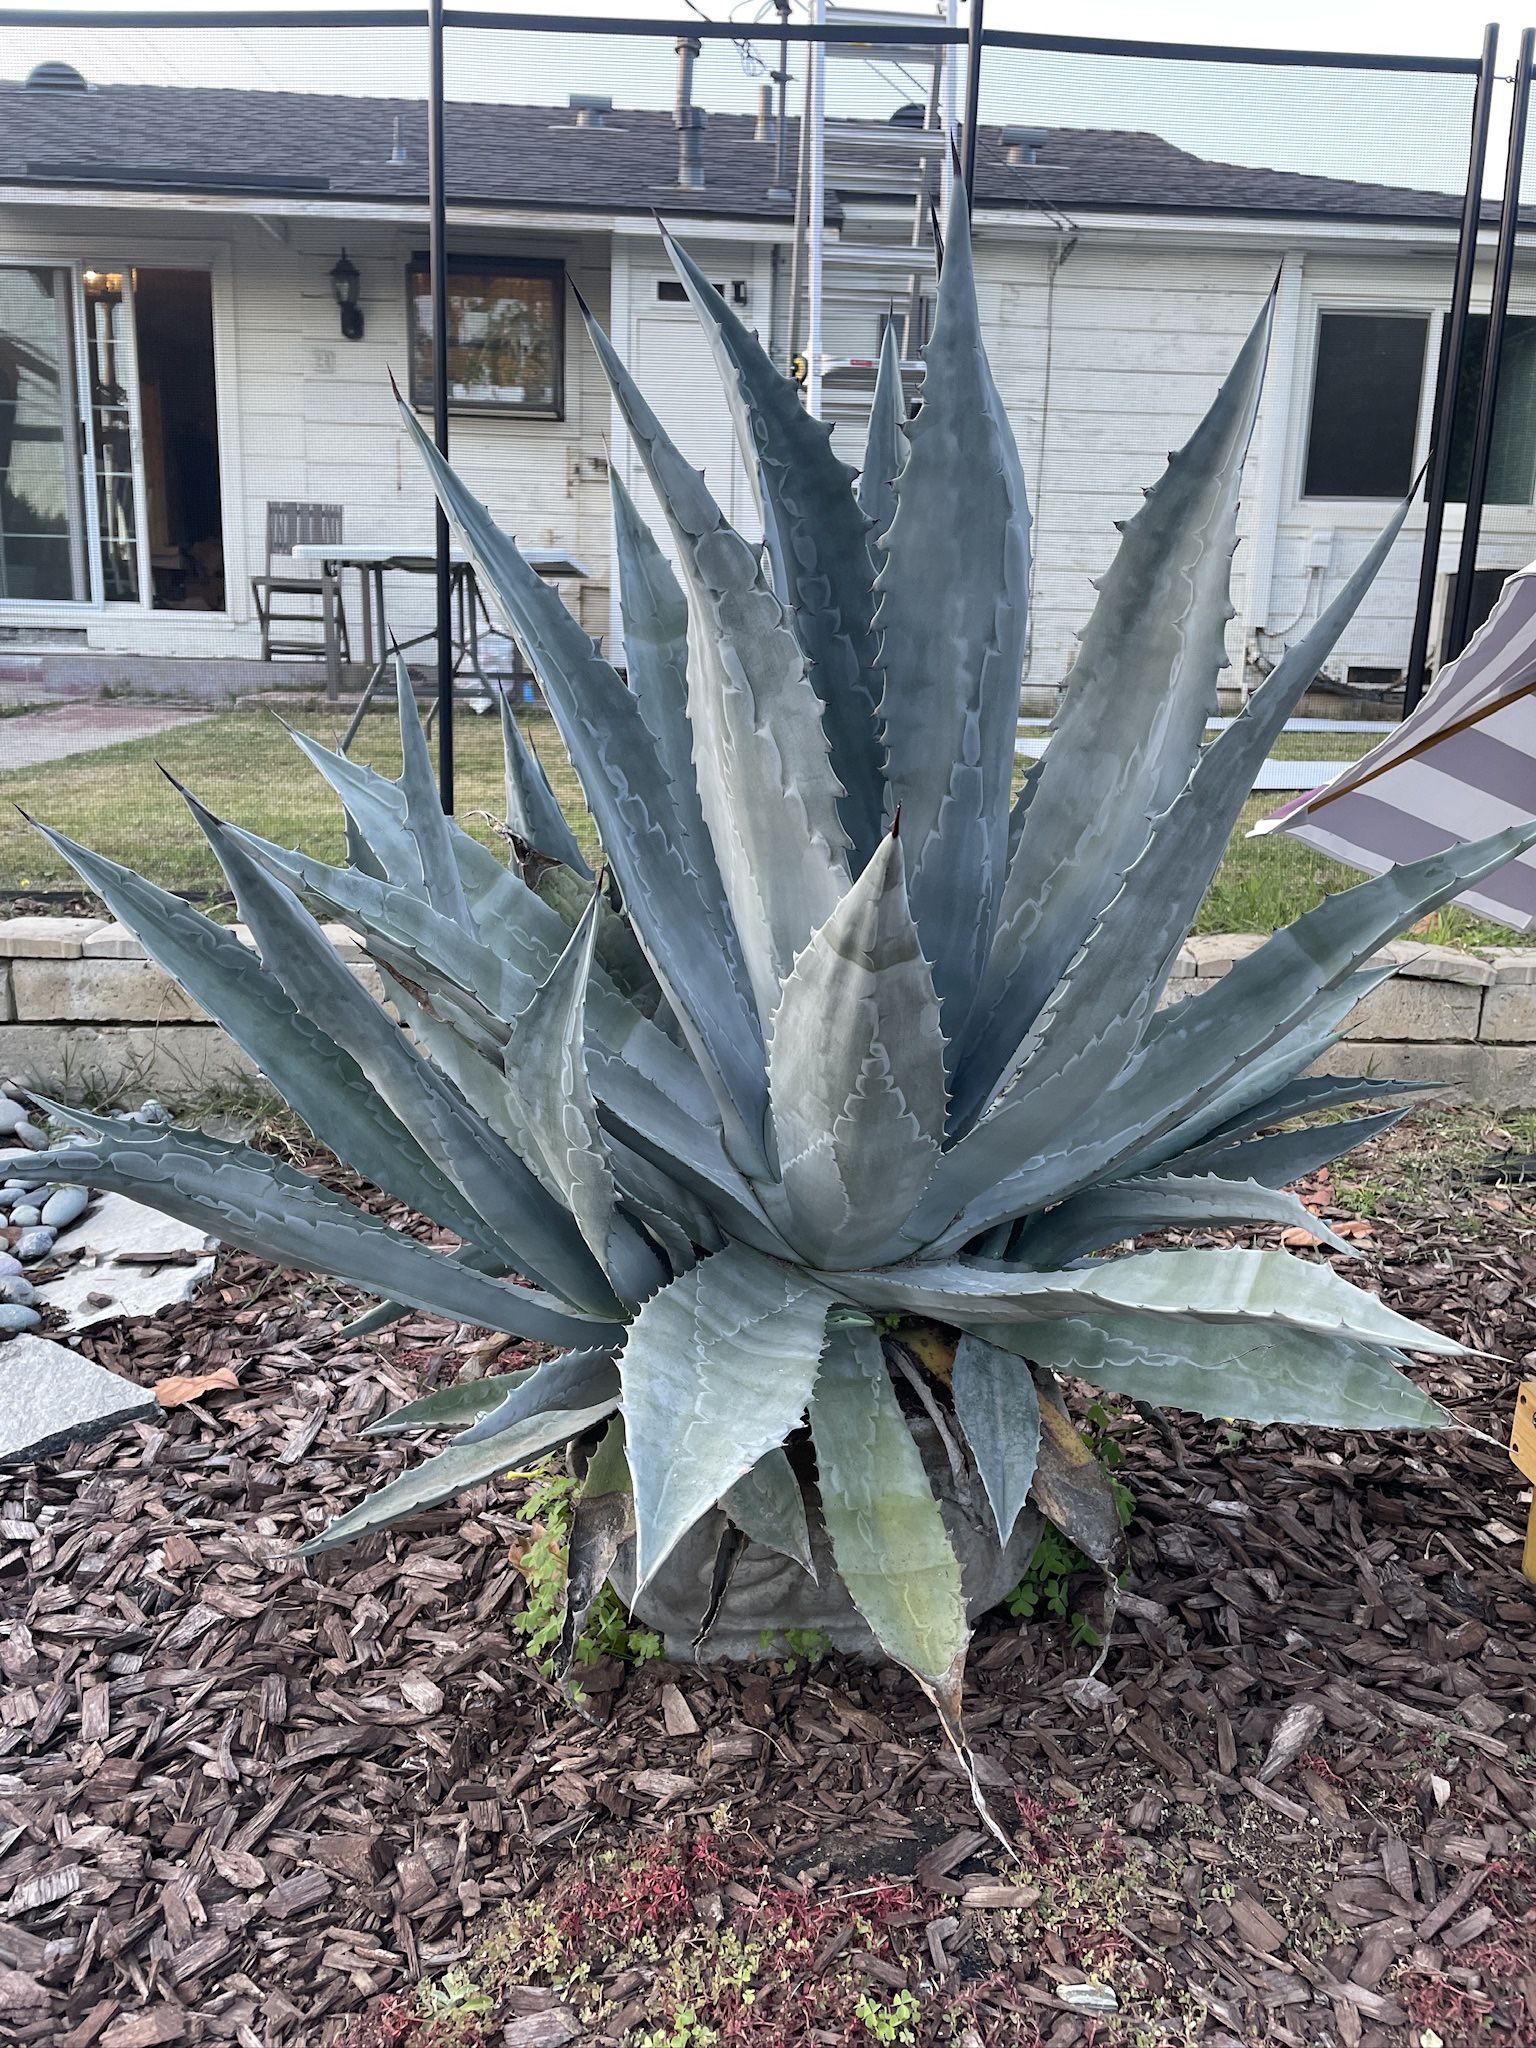 Potted Agave Plants